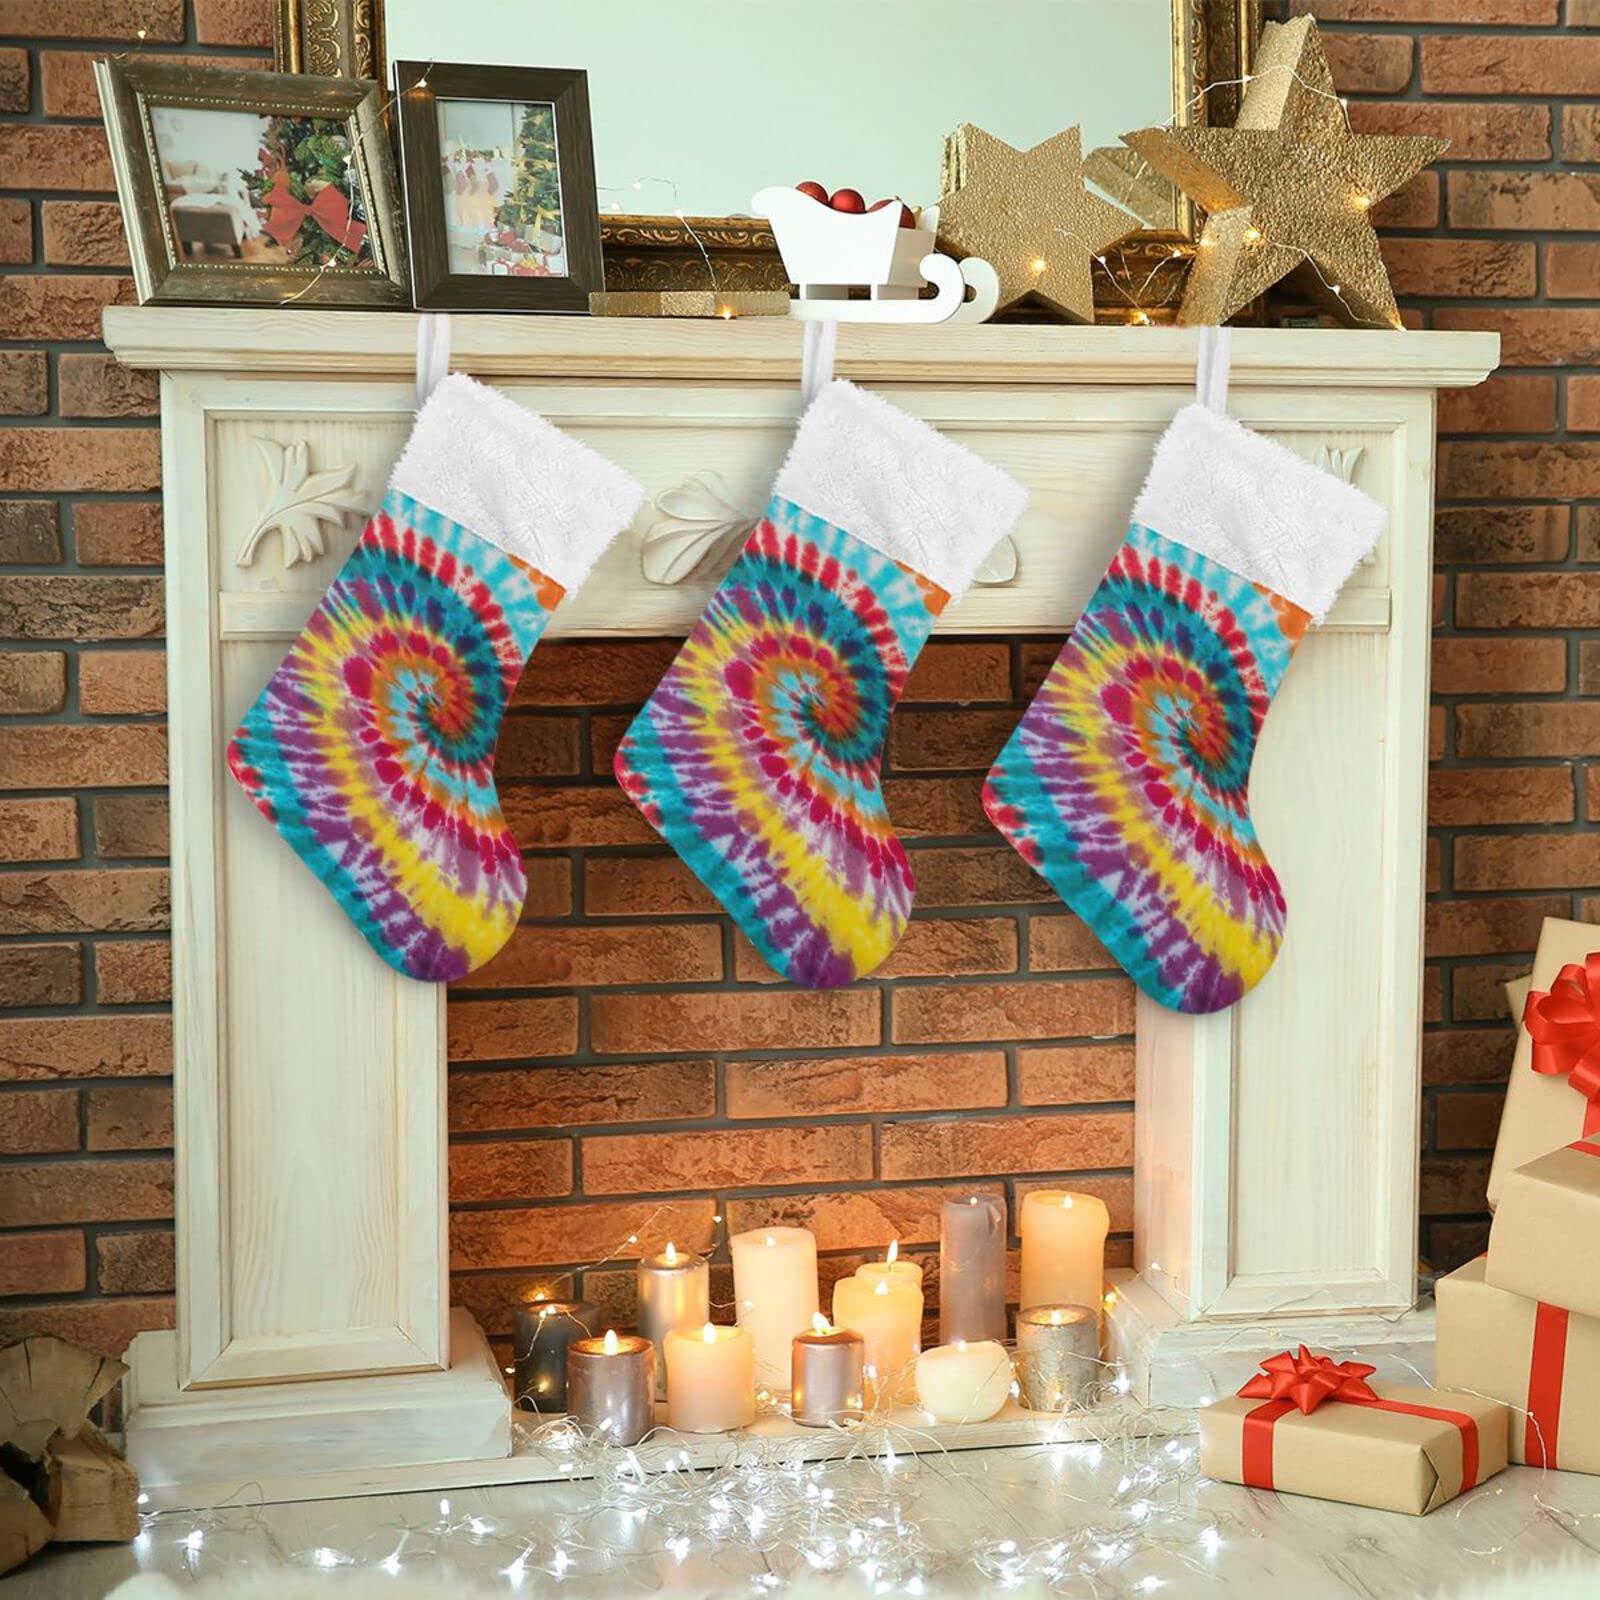 How to Tie-Dye The Christmas Stocking